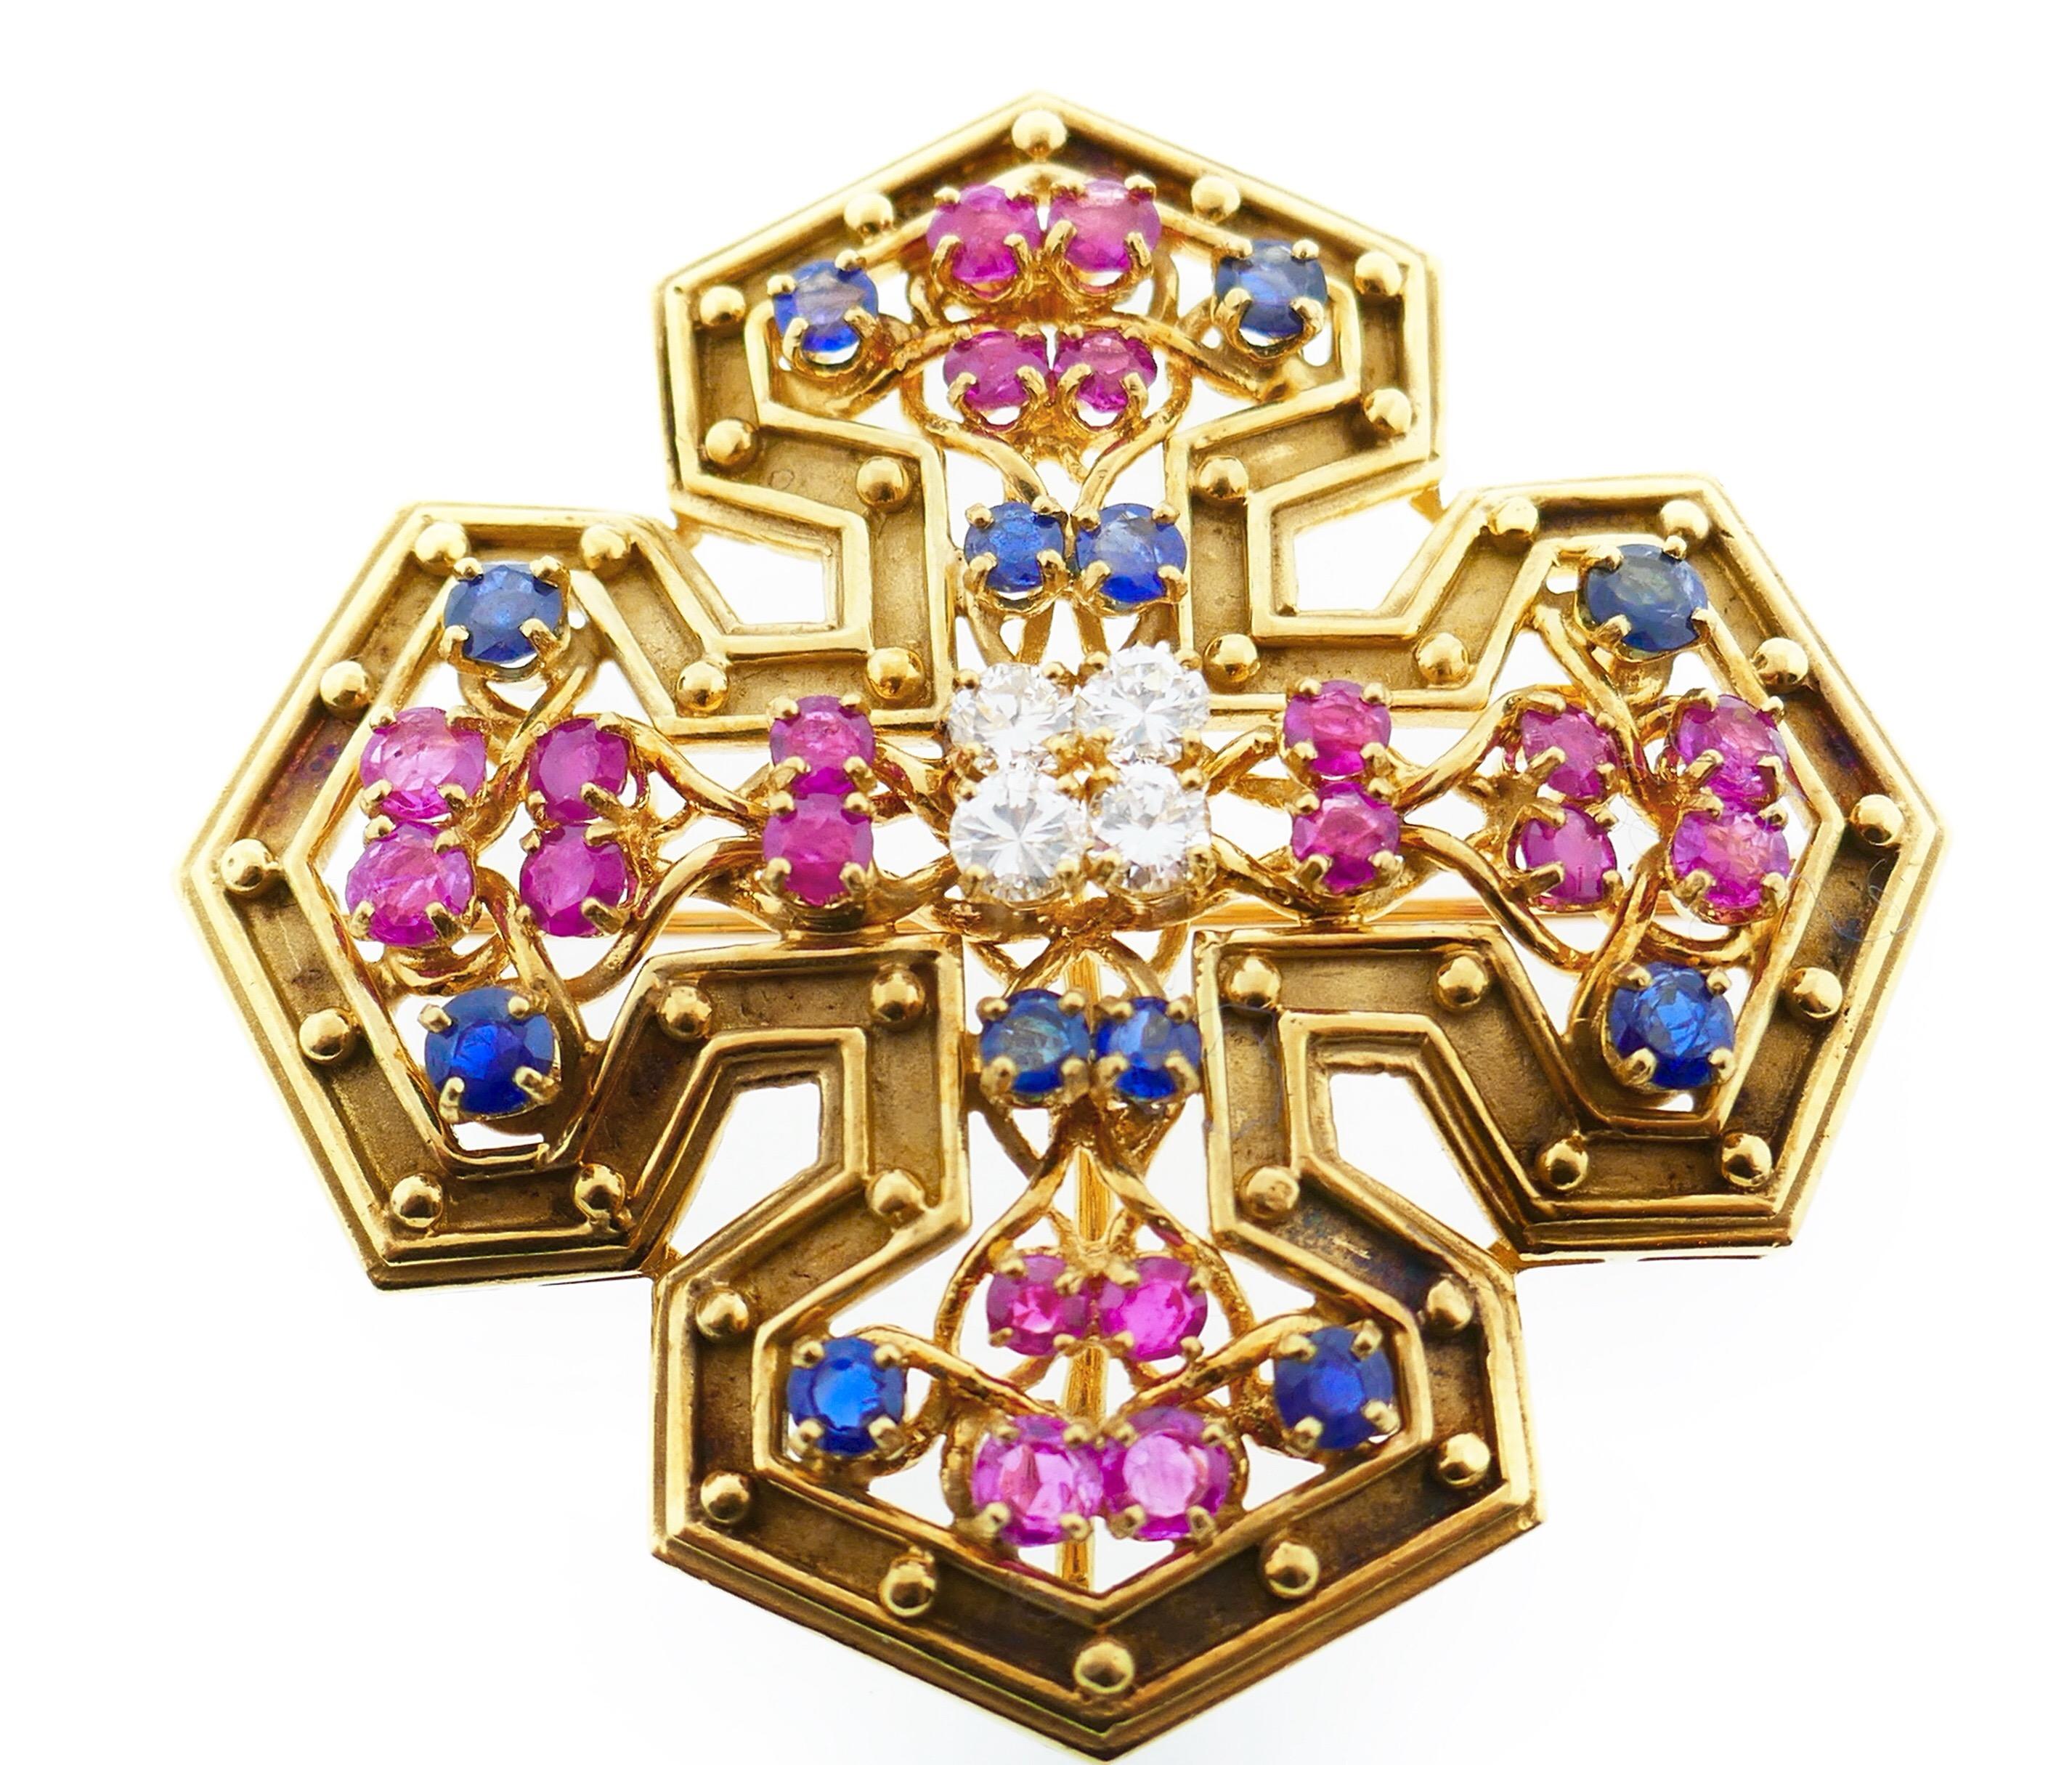 Tiffany & Co. White Pink Blue Sapphire 18 Karat Yellow GoldMaltese Cross Brooch / Pendant

A very unique piece. It can be worn as a brooch or a pendent. This maltese cross is set with three different types of excellent quality sapphires: pink, blue,